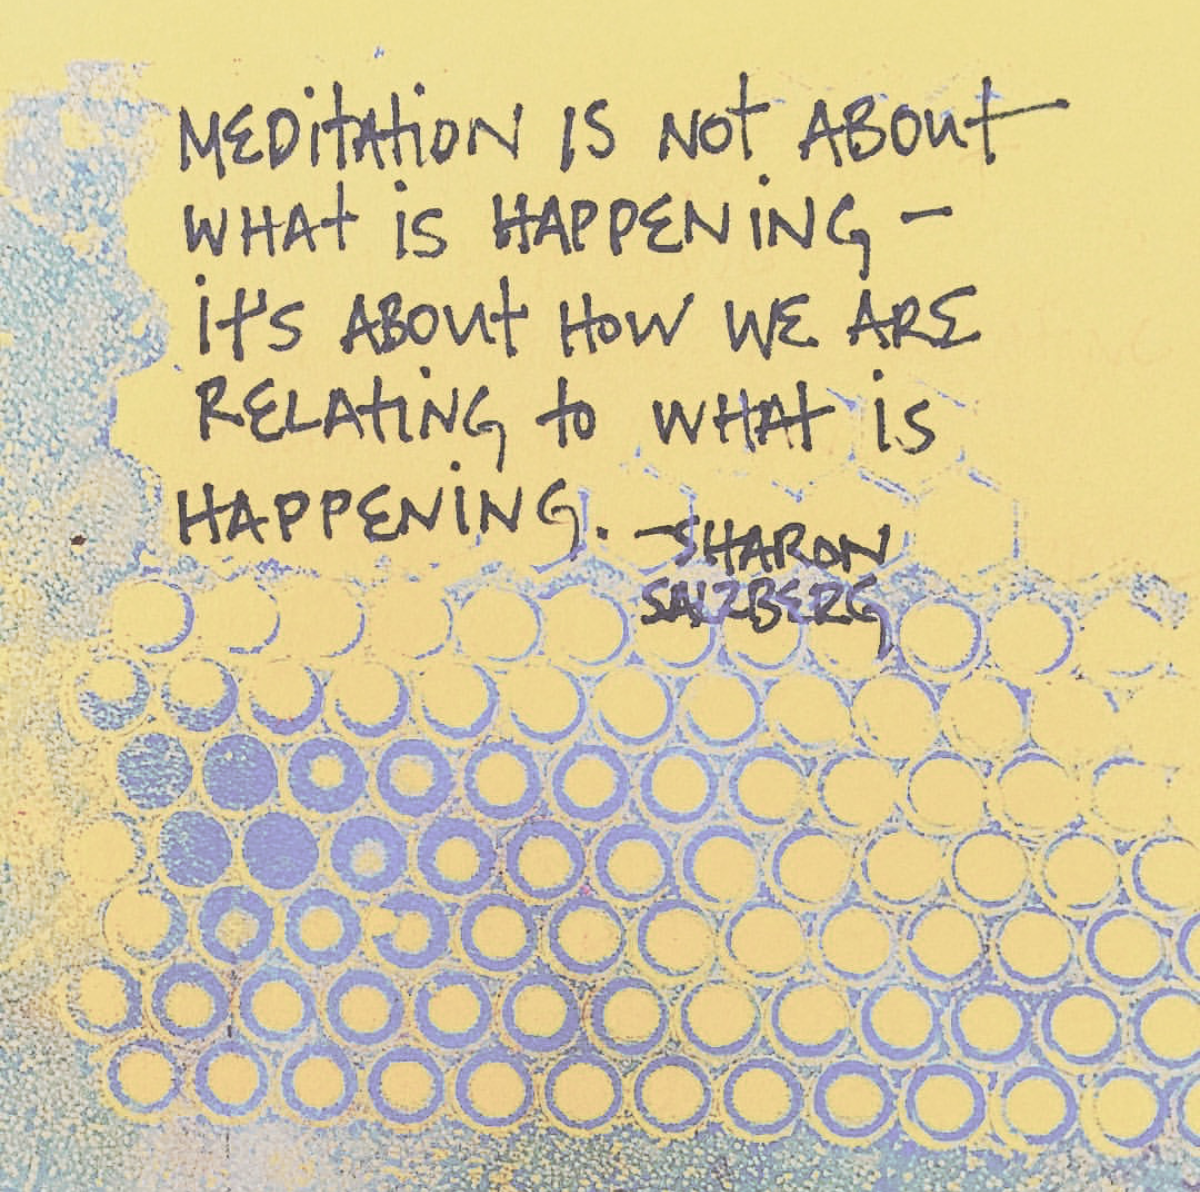 Meditation is about HOW WE ARE RELATING - Sharon Salzberg